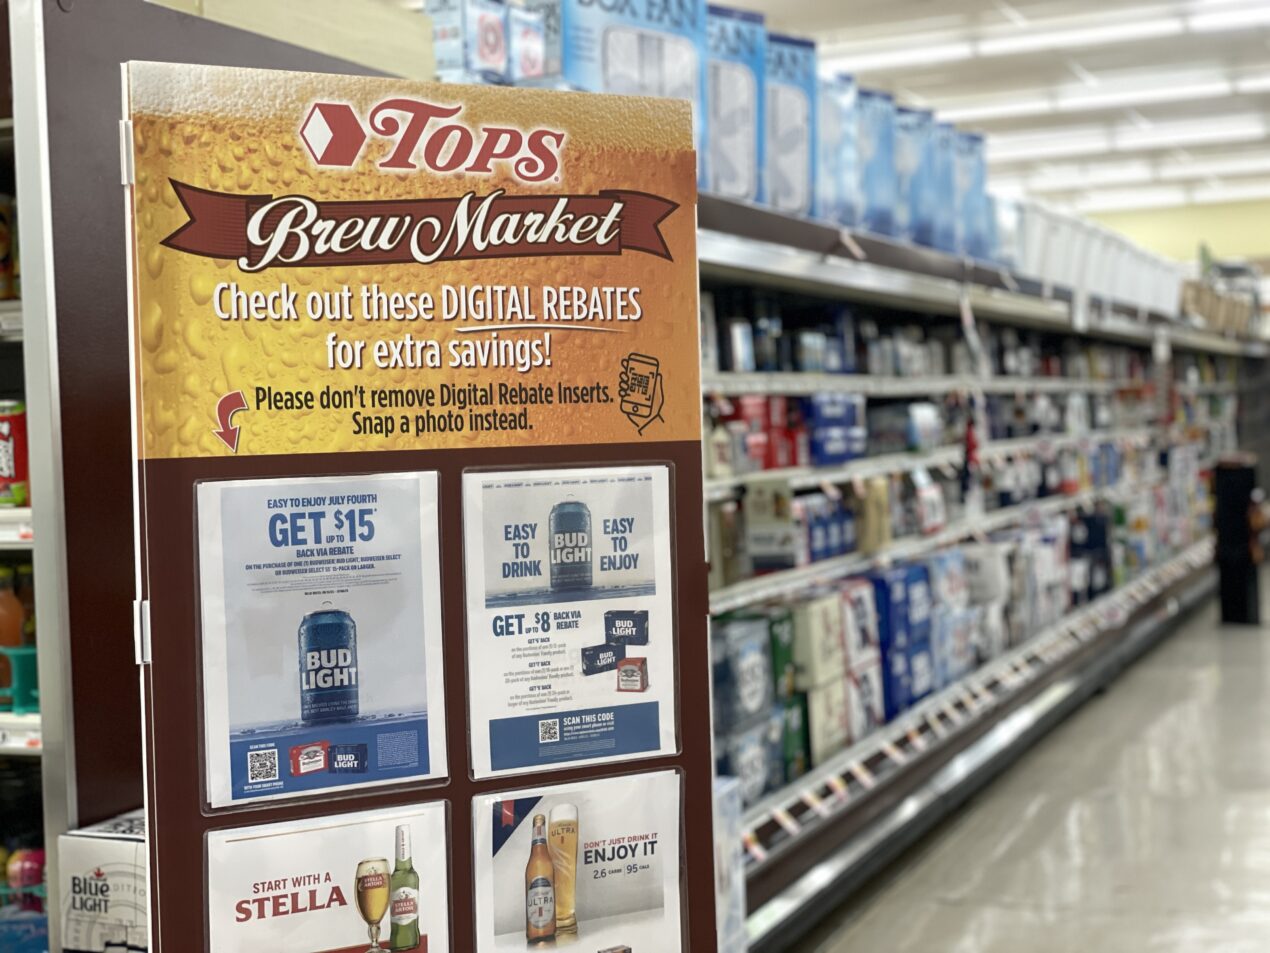 Save on Beer at Tops with Digital Rebates! My Momma Taught Me